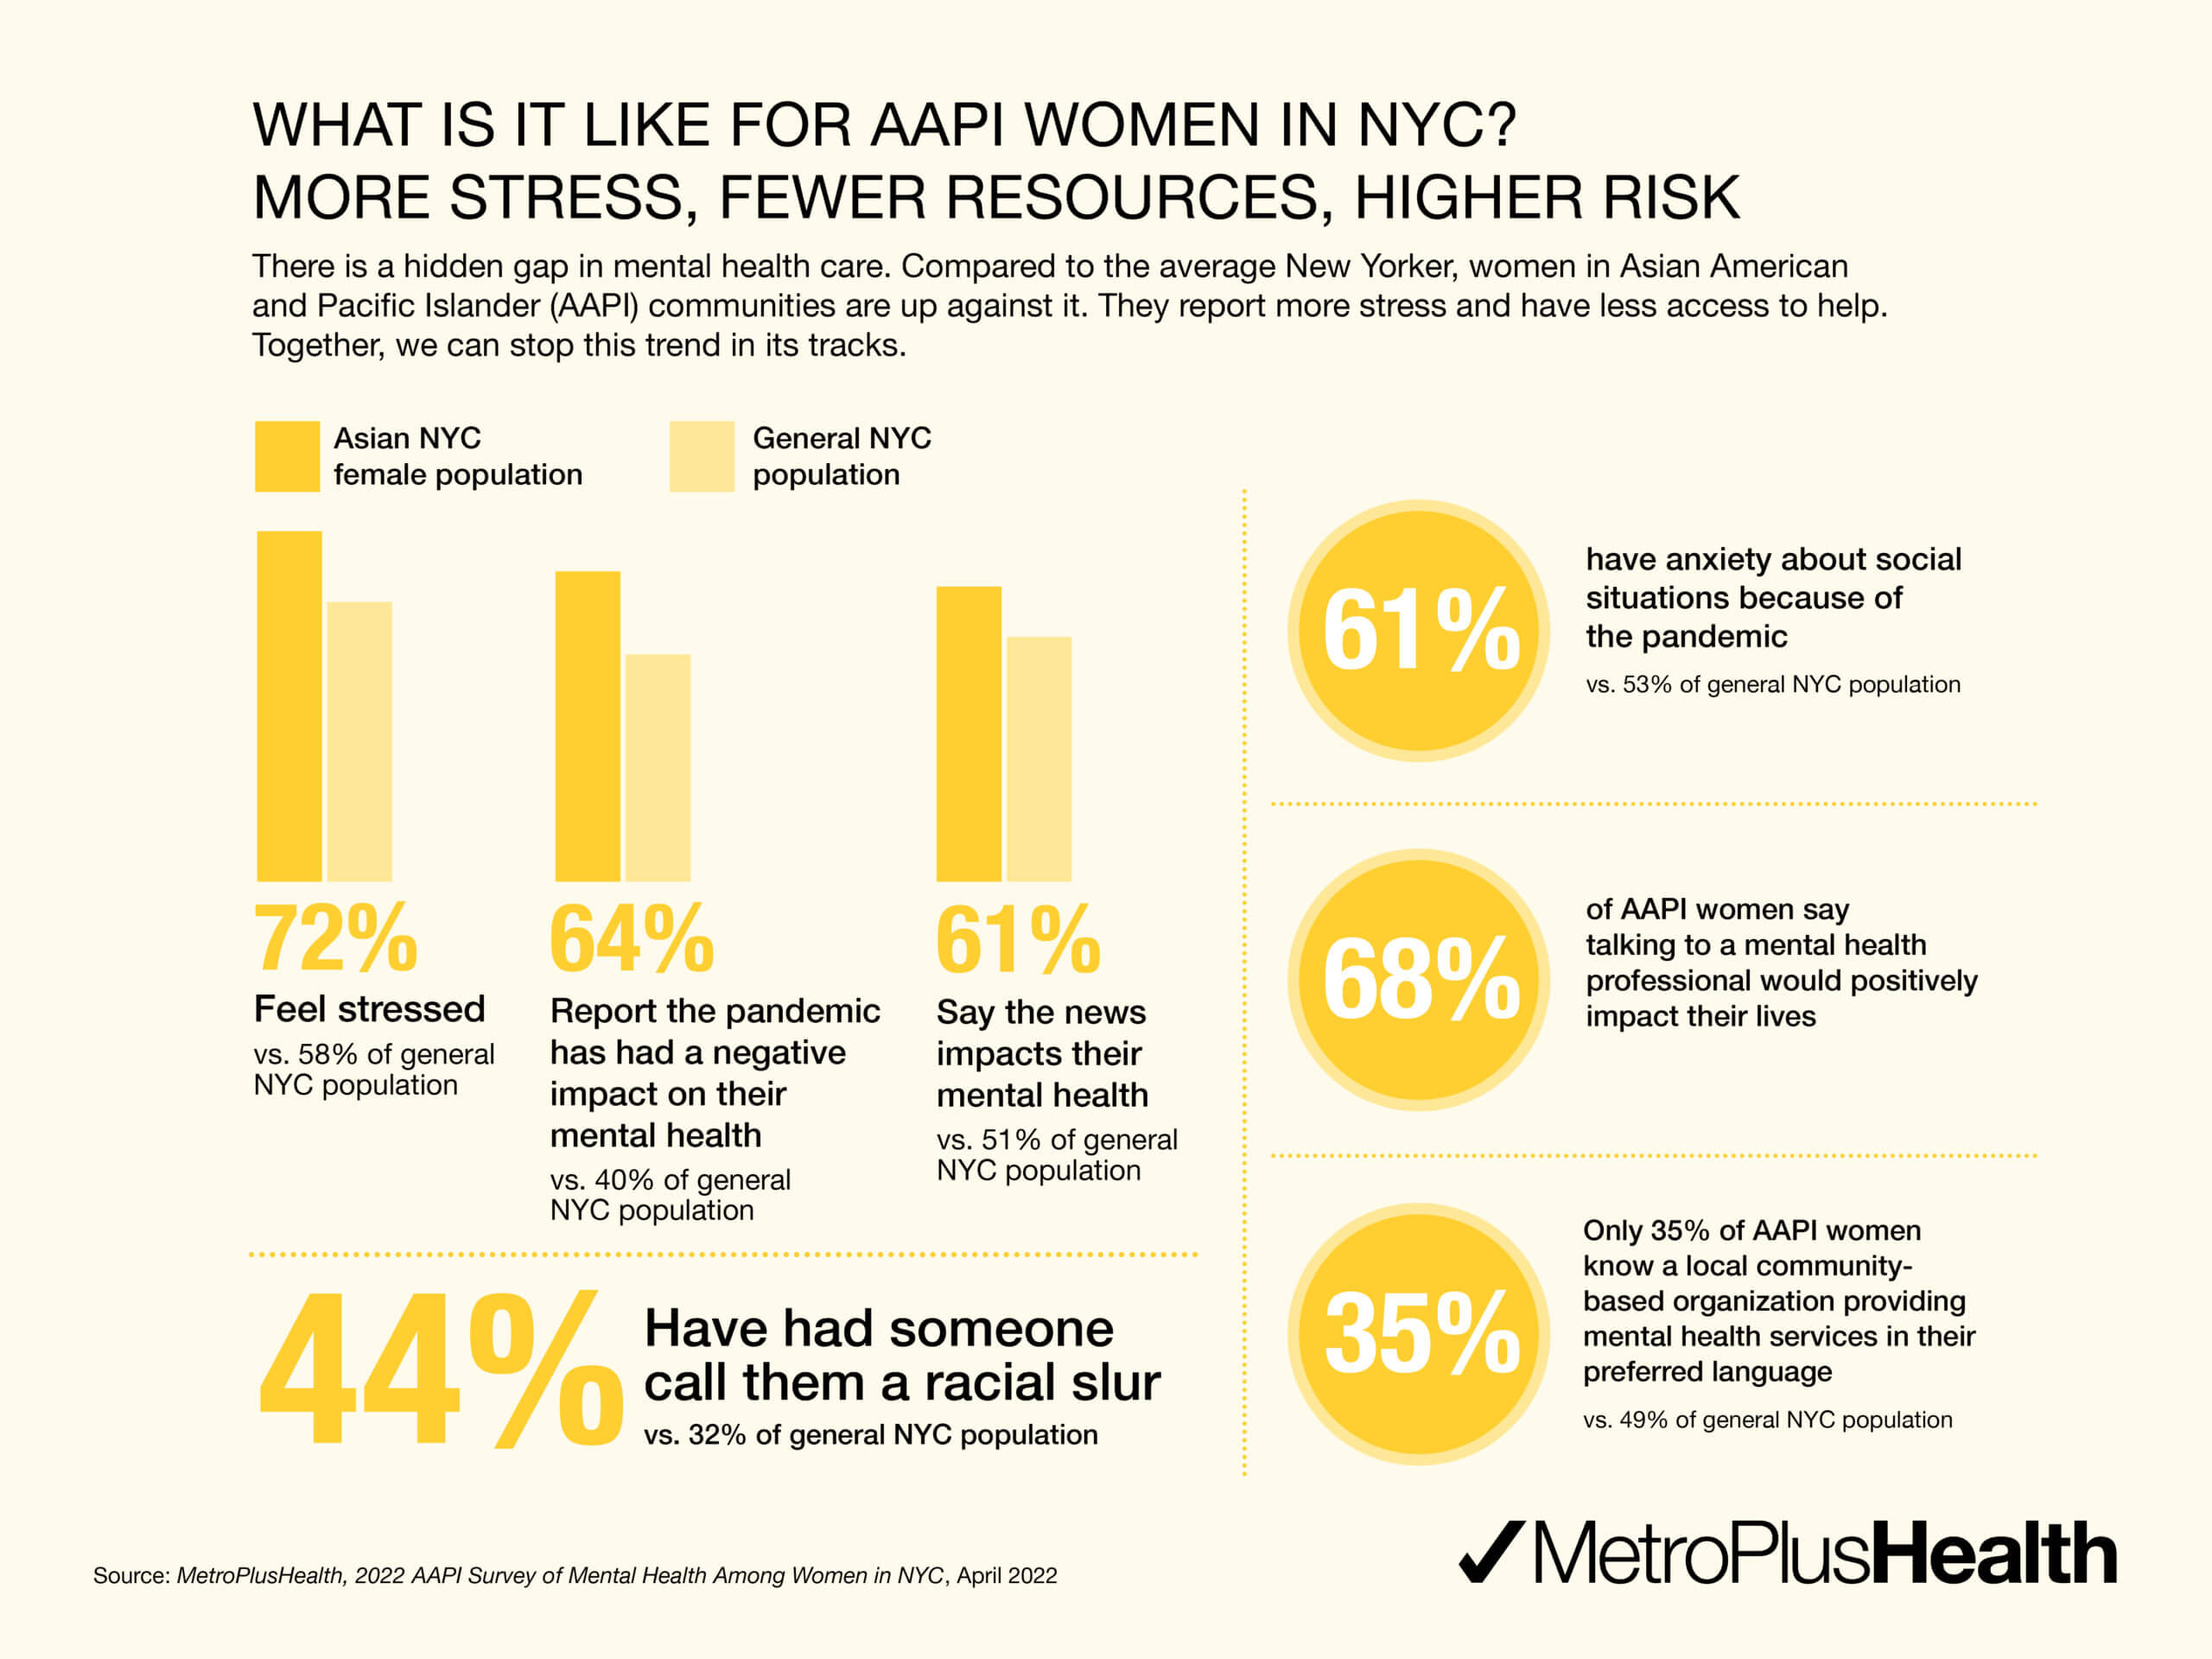 MetroPlusHealth survey finds AAPI women face increased barriers to mental health access and support in NYC